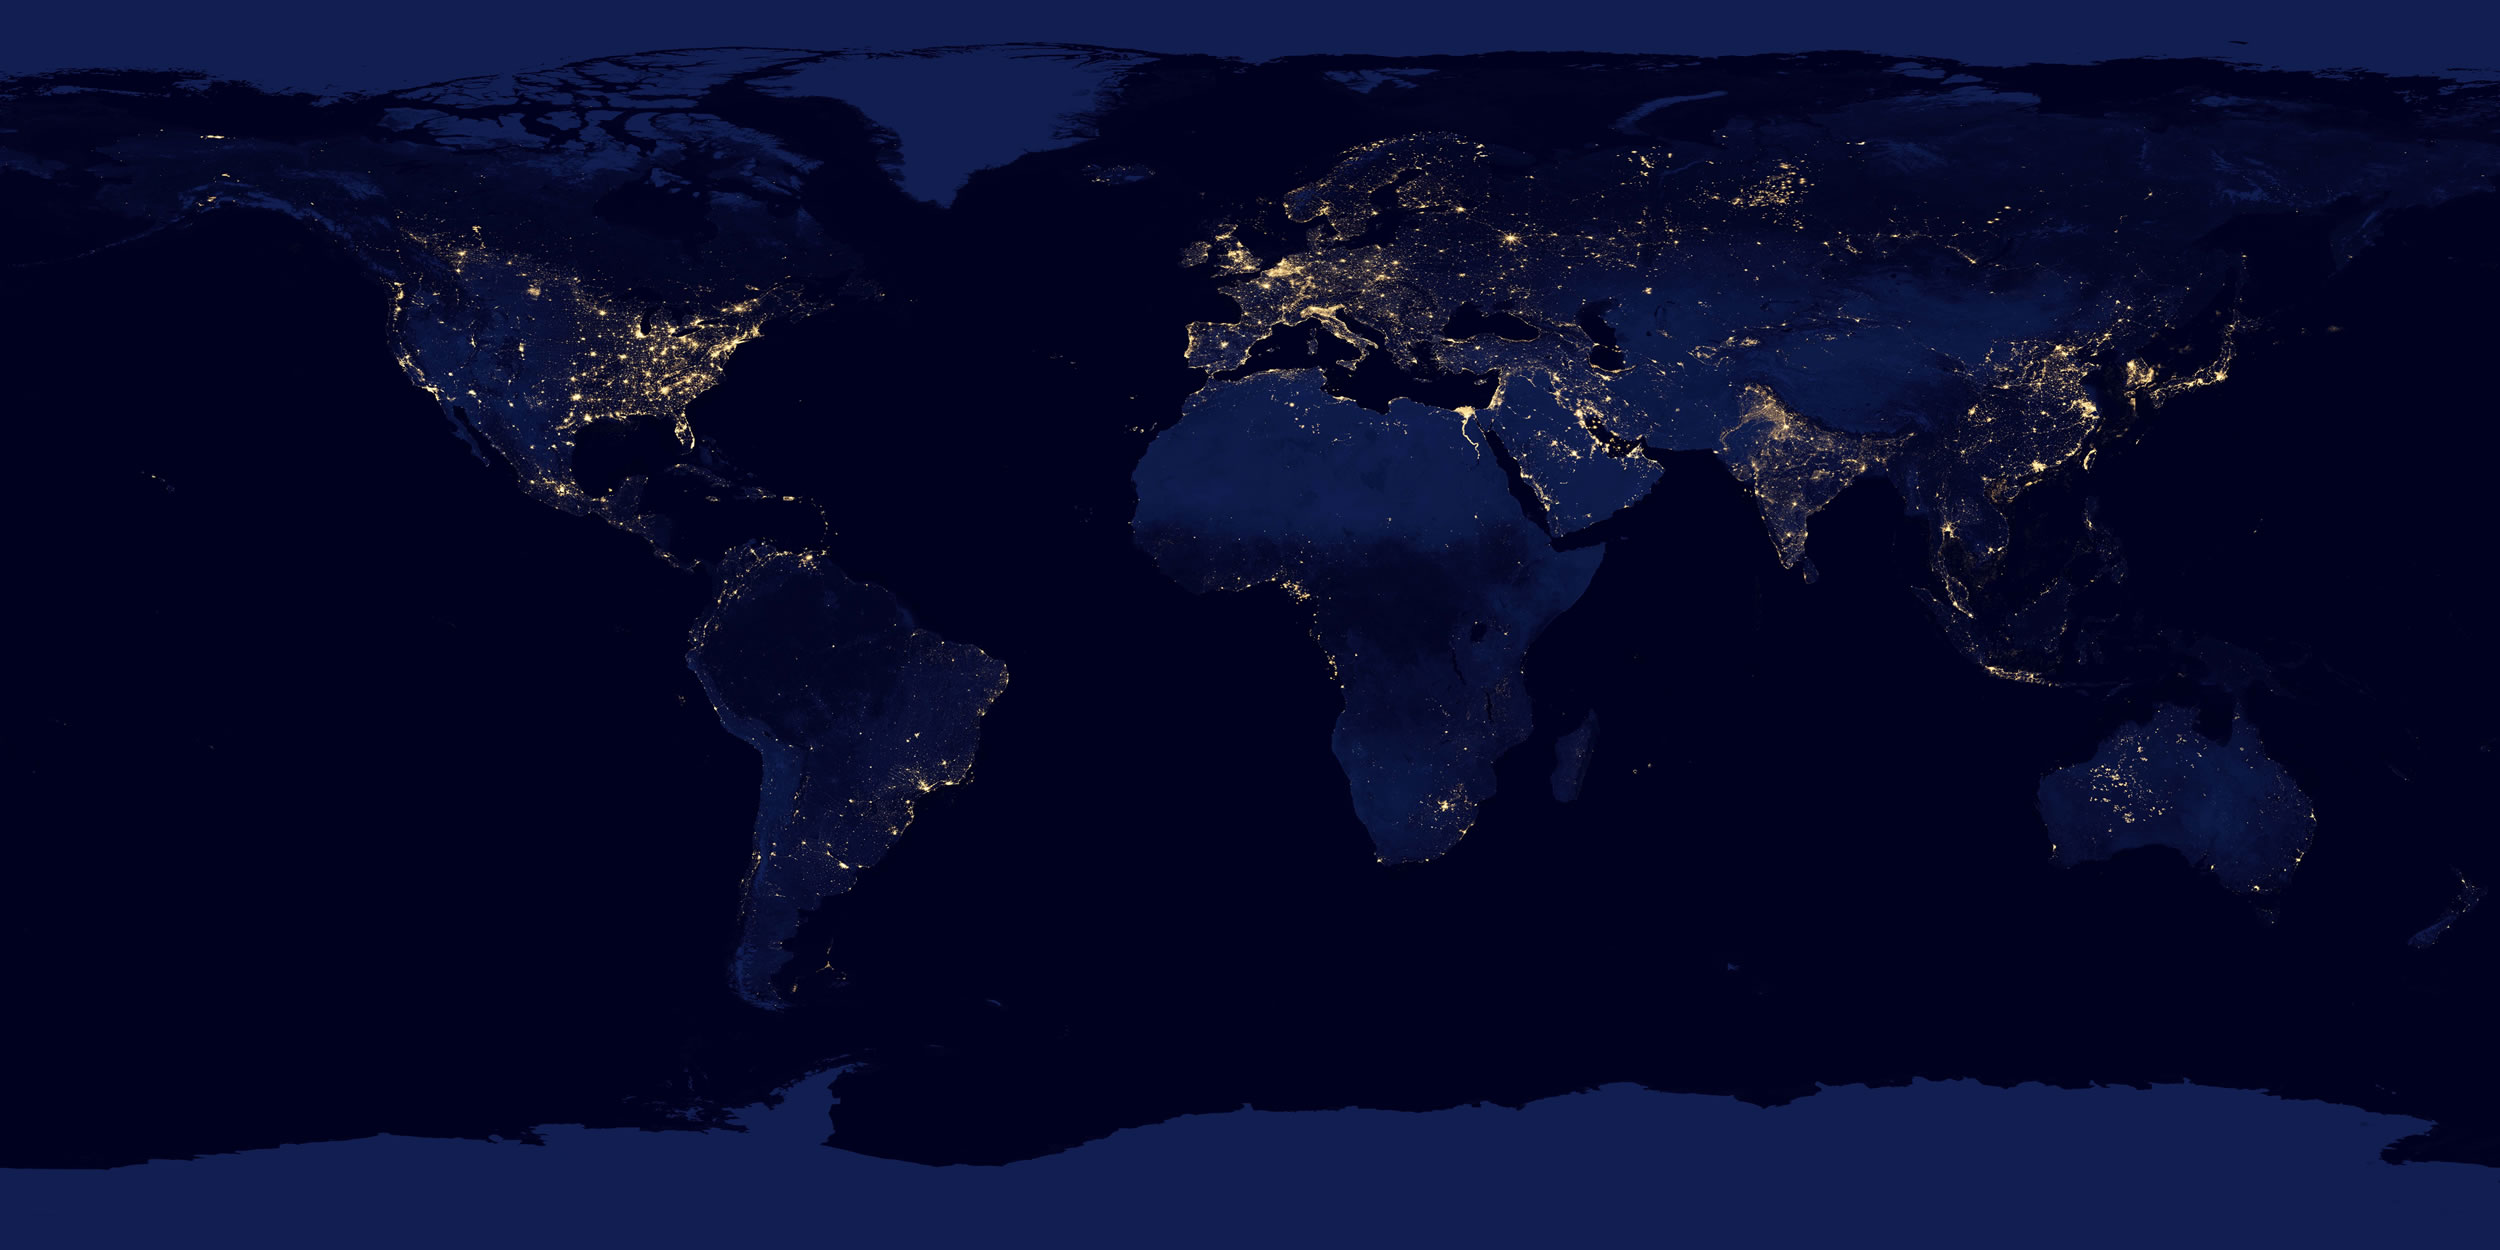 satellite-view-of-earth-at-night.jpg